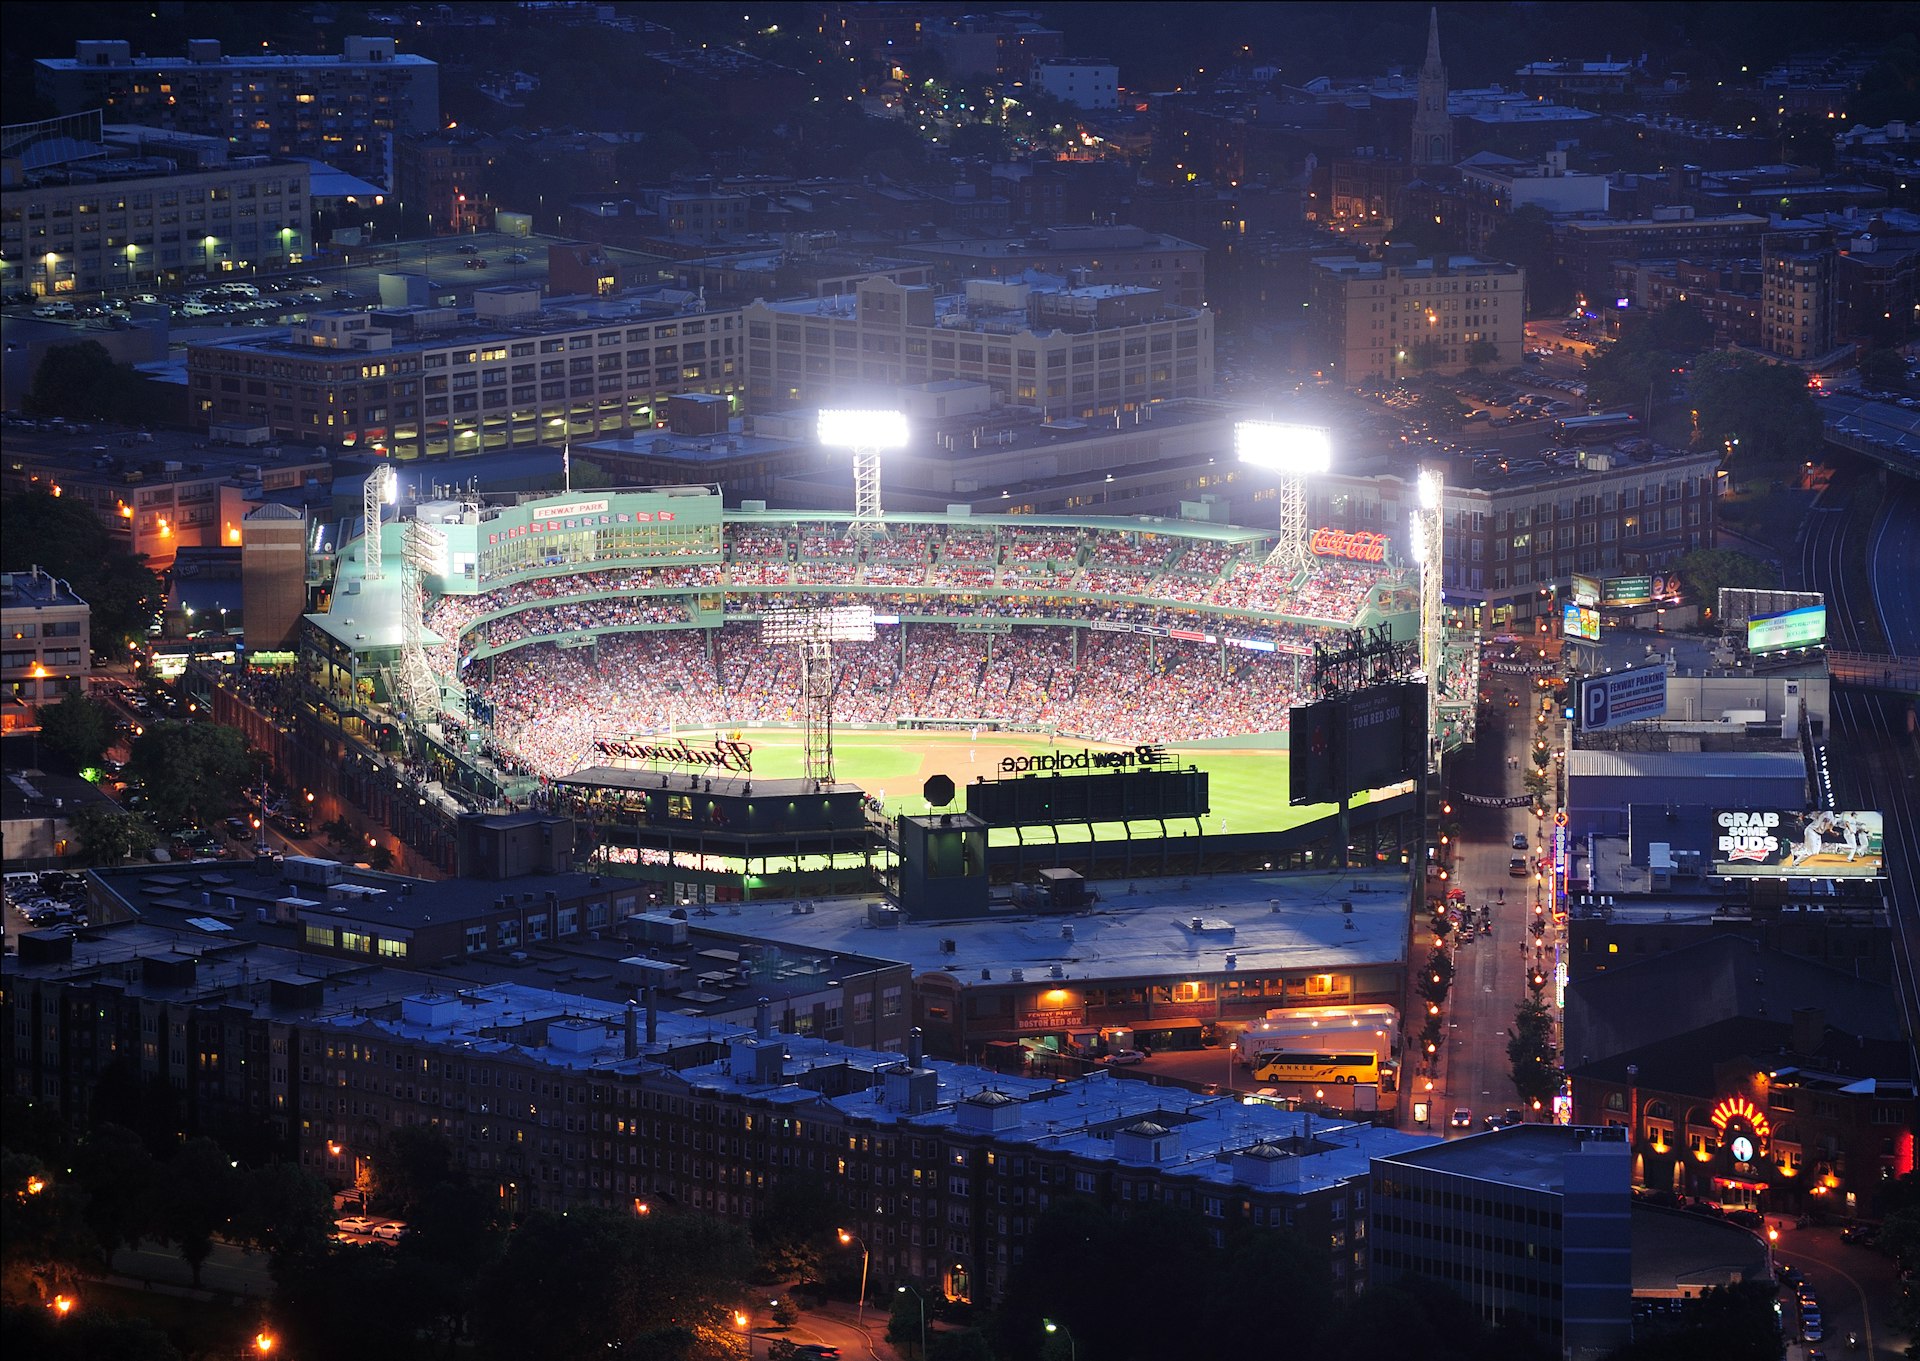 An aerial shot of a night game at Fenway Park, Boston, Massachusetts, USA